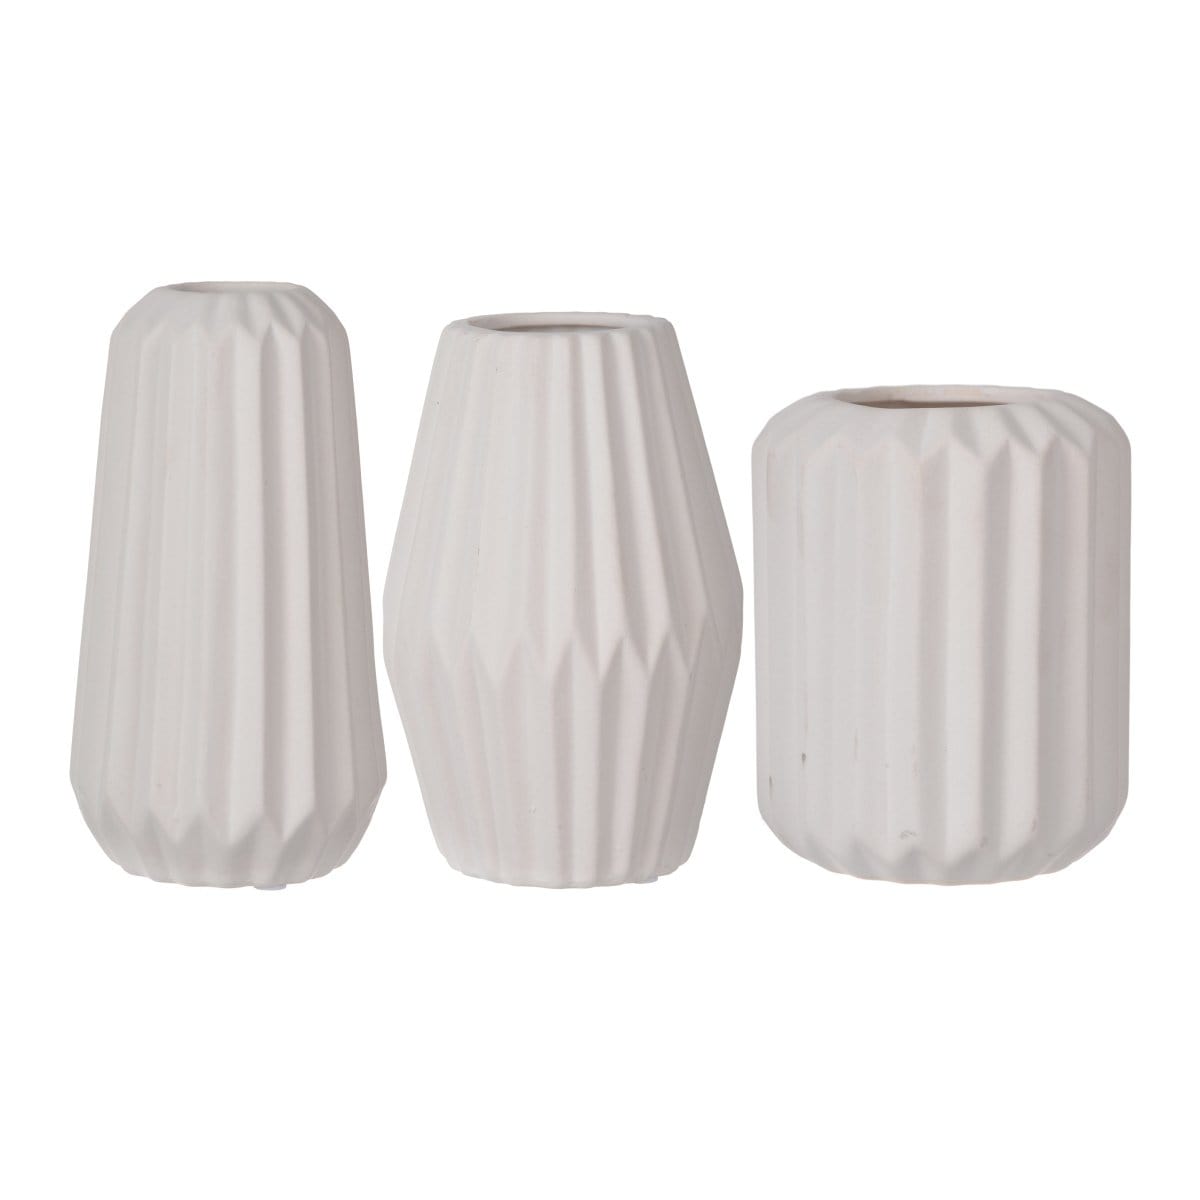 AB-HPACC2514 S/3 Aven Vases - Tall picket and rail